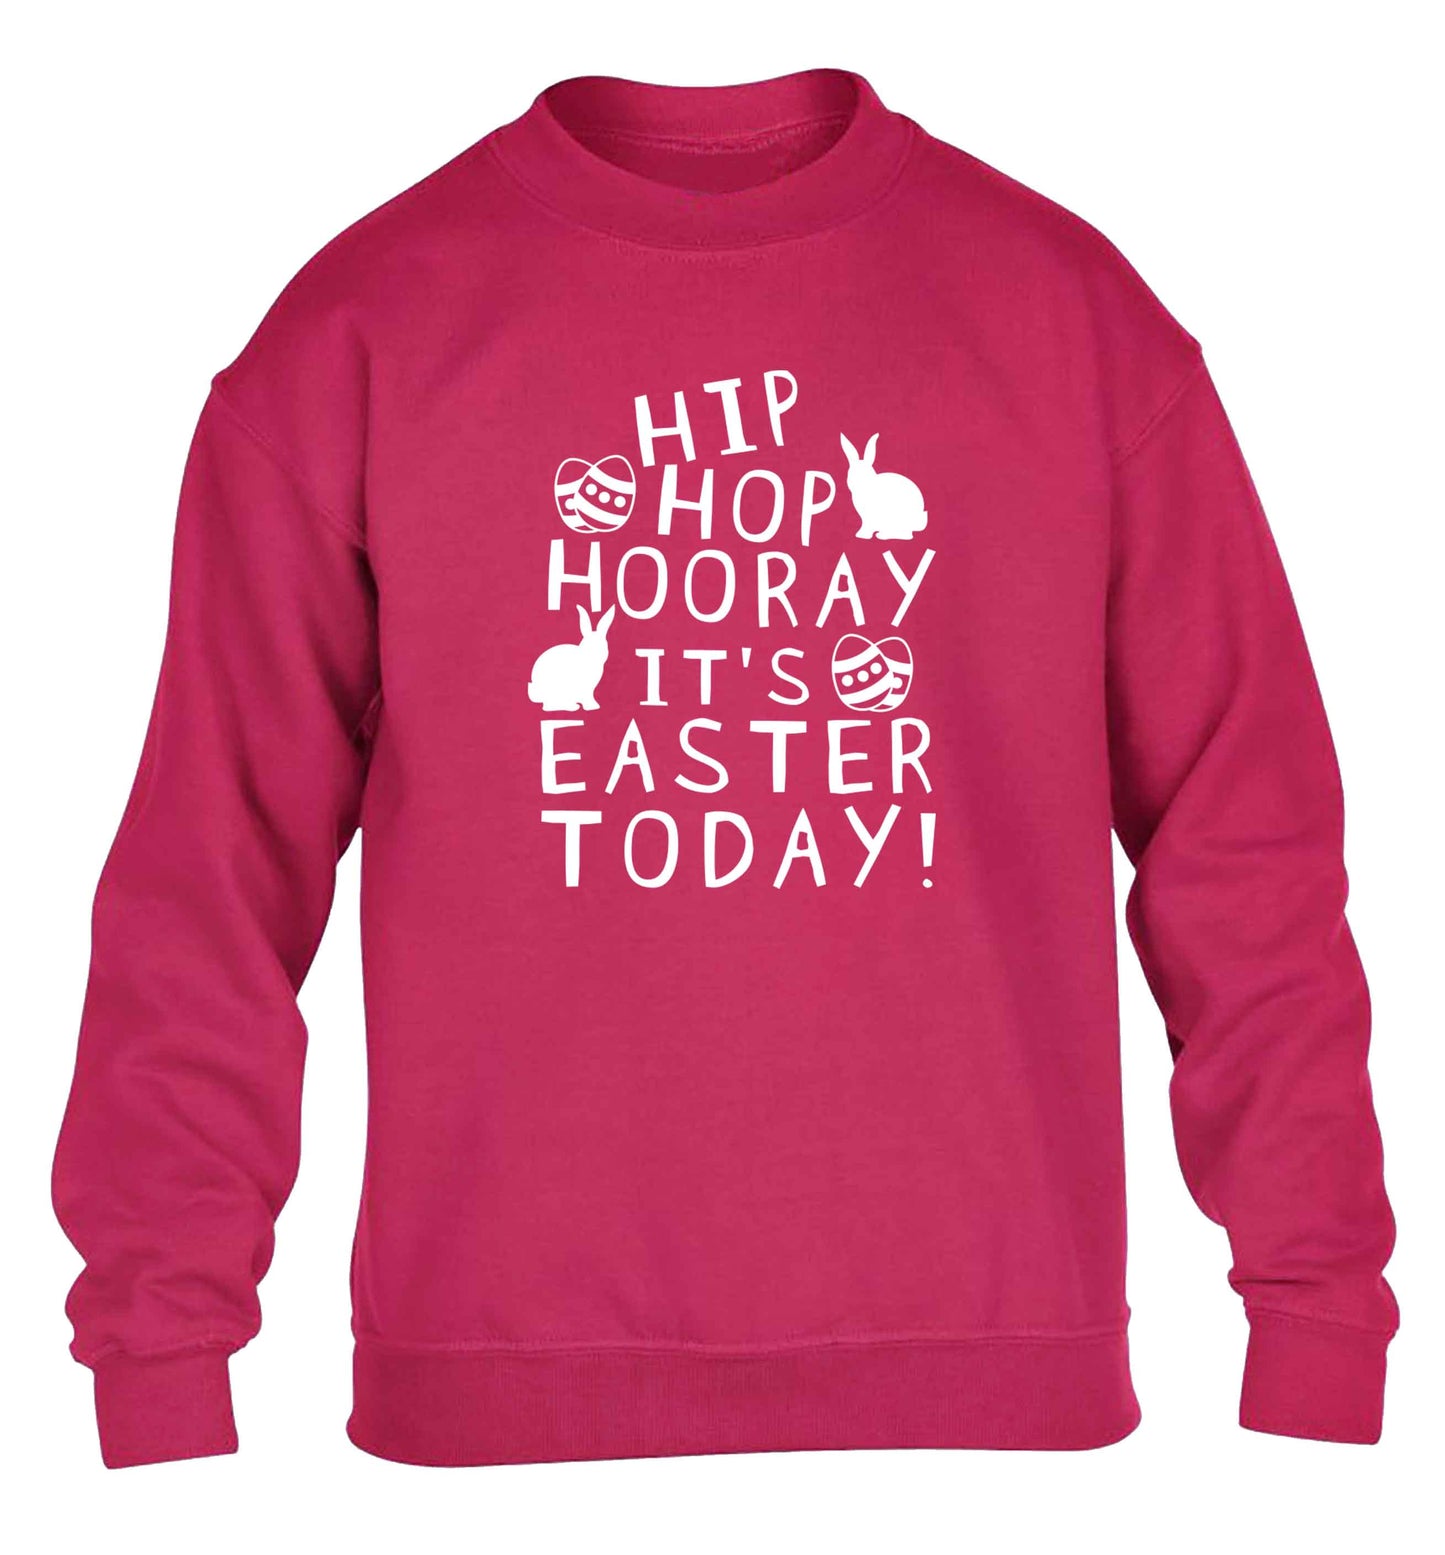 Hip hip hooray it's Easter today! children's pink sweater 12-13 Years